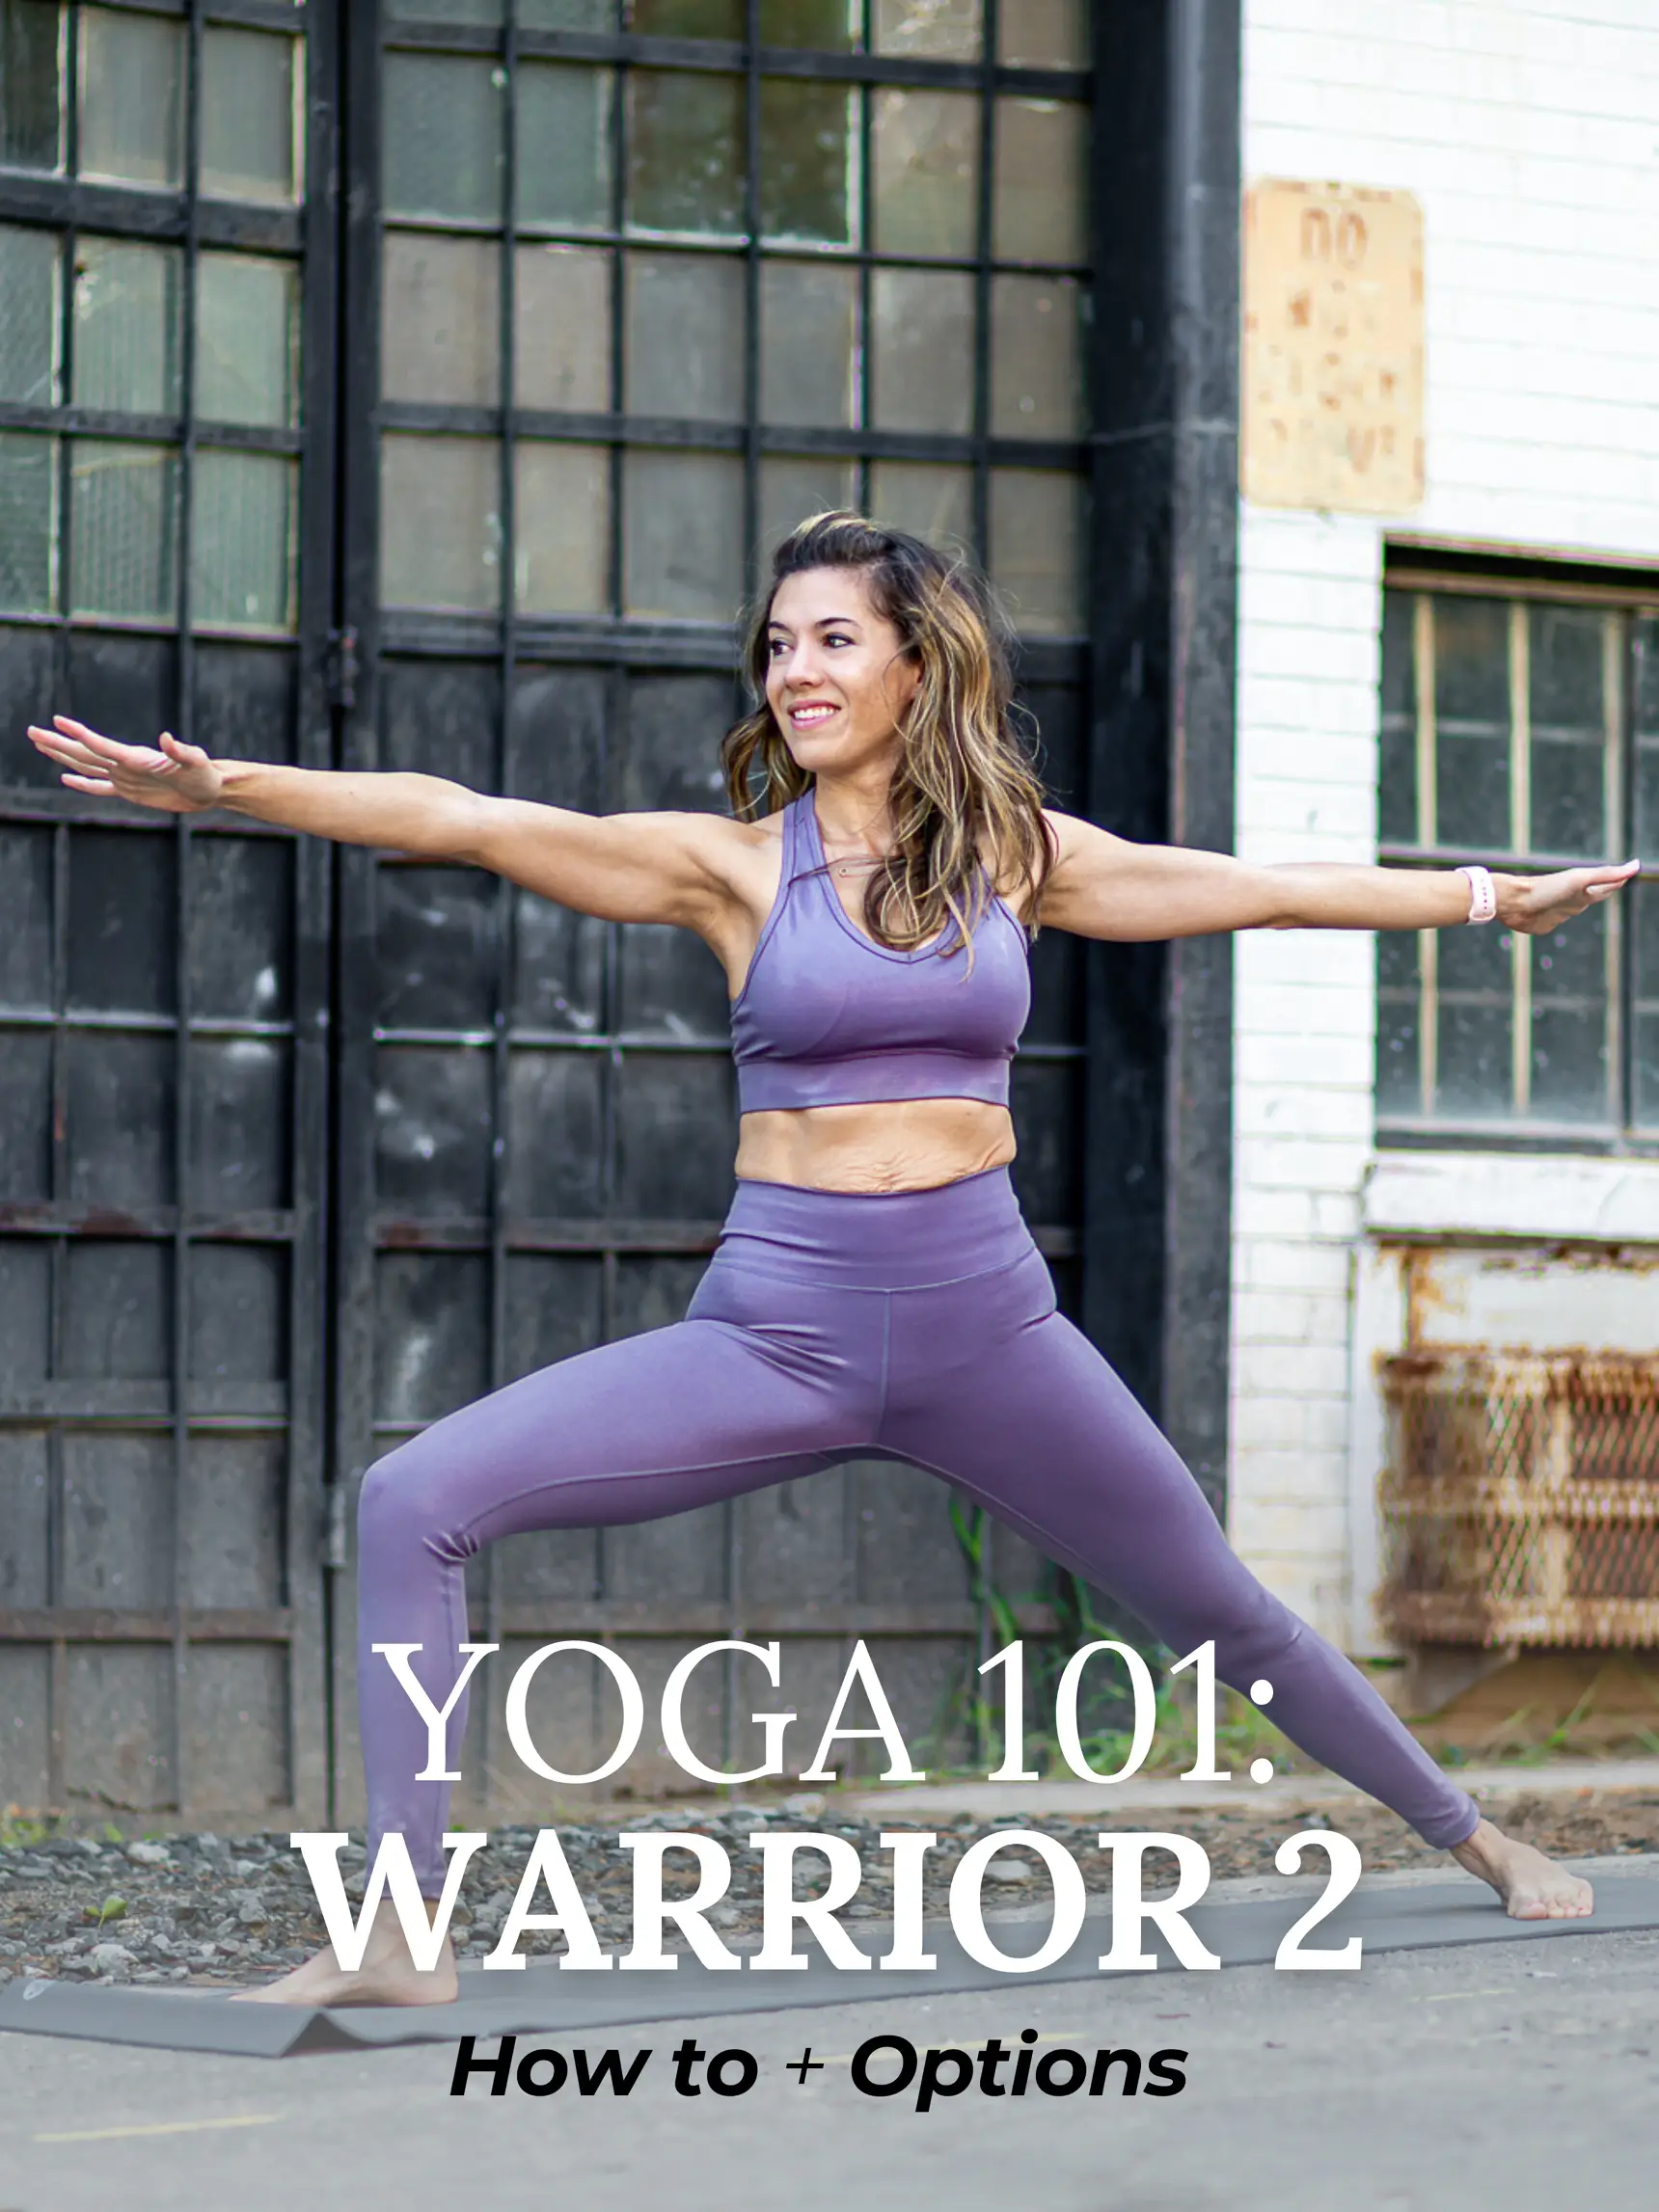 𝚆𝚊𝚛𝚛𝚒𝚘𝚛 𝟸, Yoga 101: How to + Options 💪